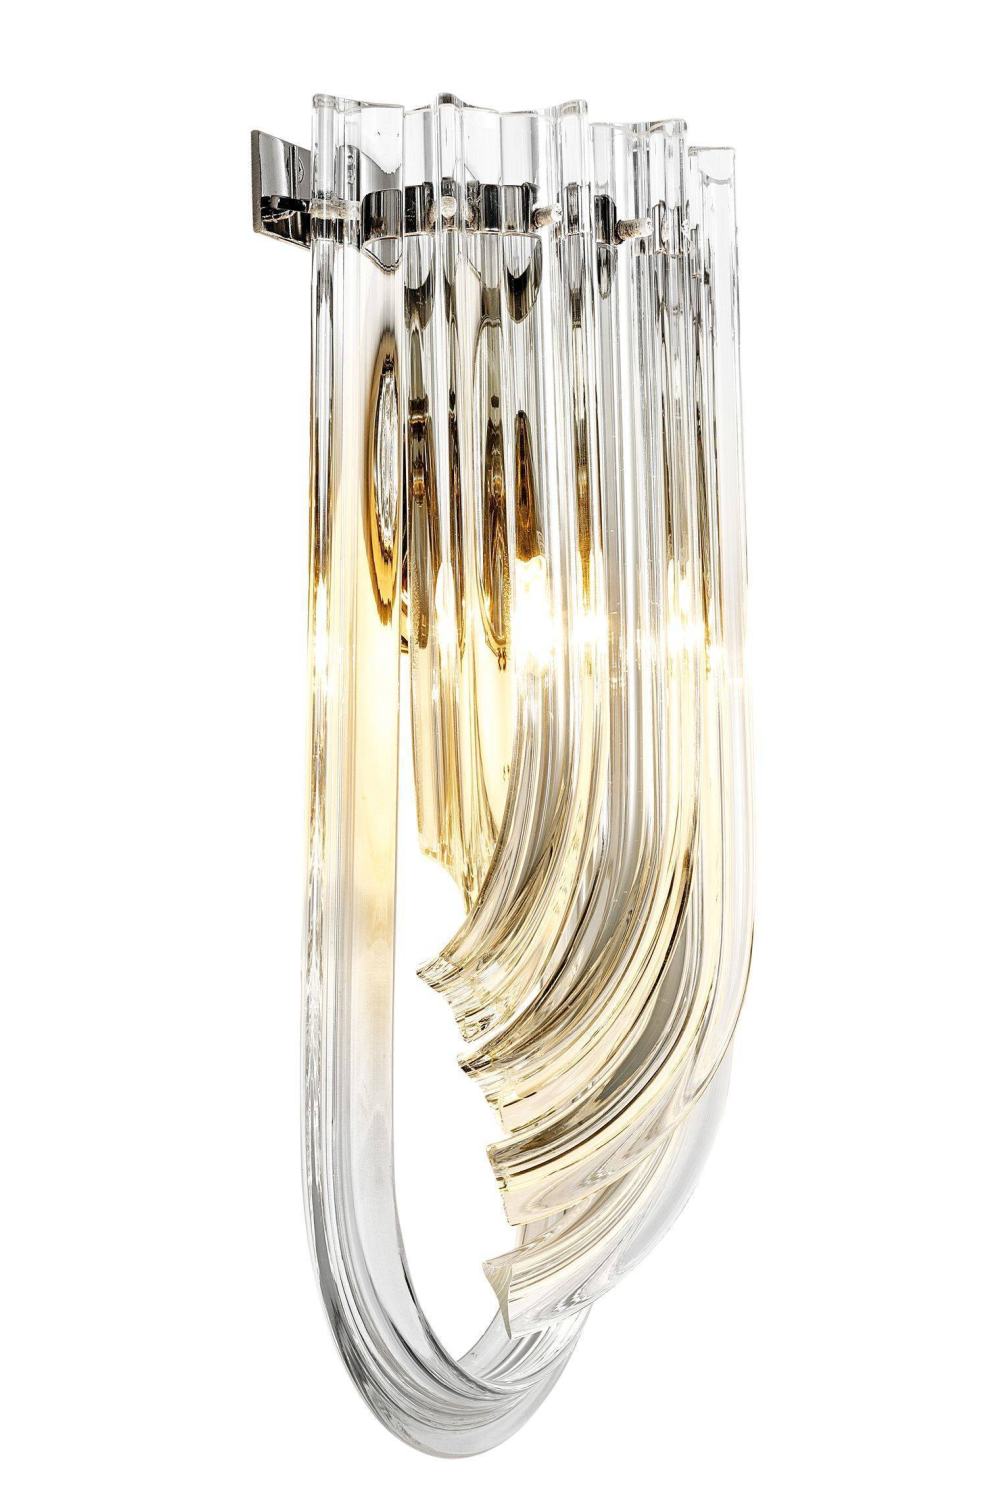 Lucite Loop Wall Sconce | Eichholtz Greco | OROA